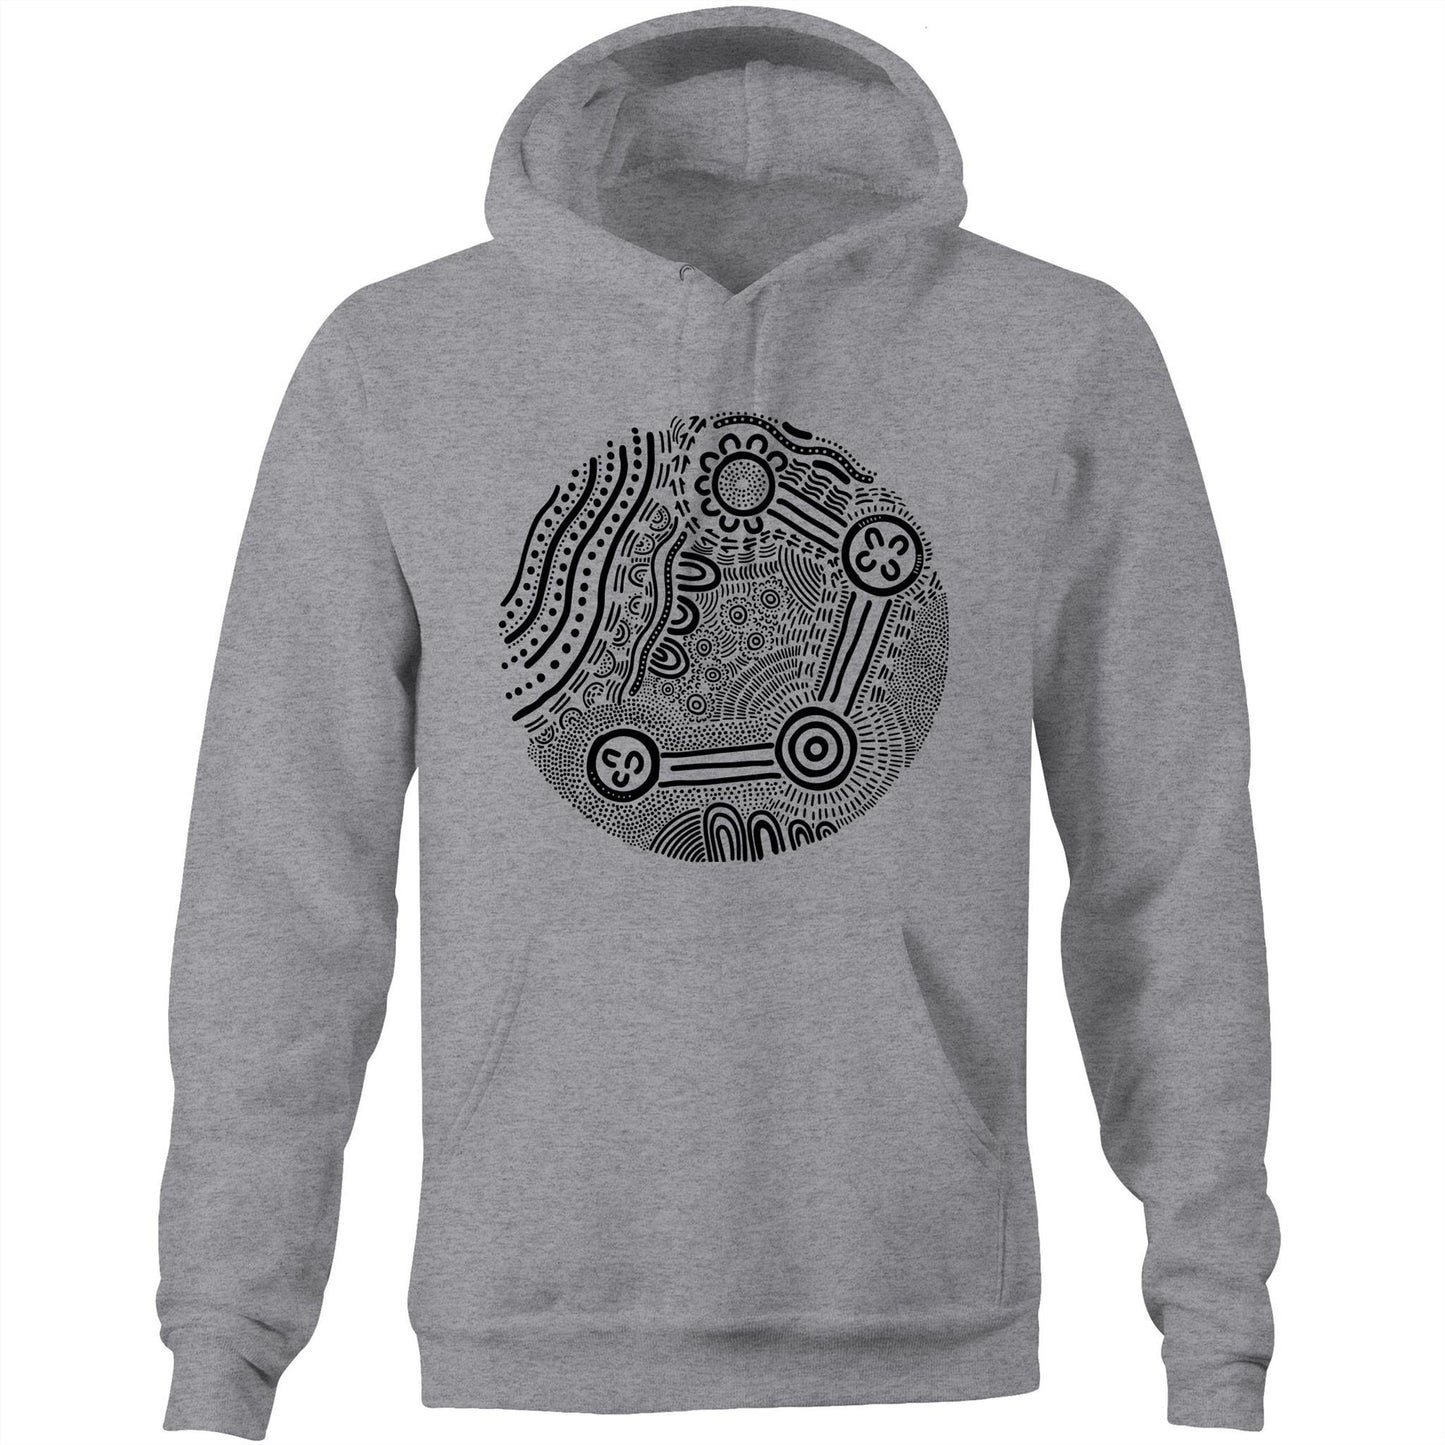 Over Time and Place Aboriginal Design Hoodie Jumper